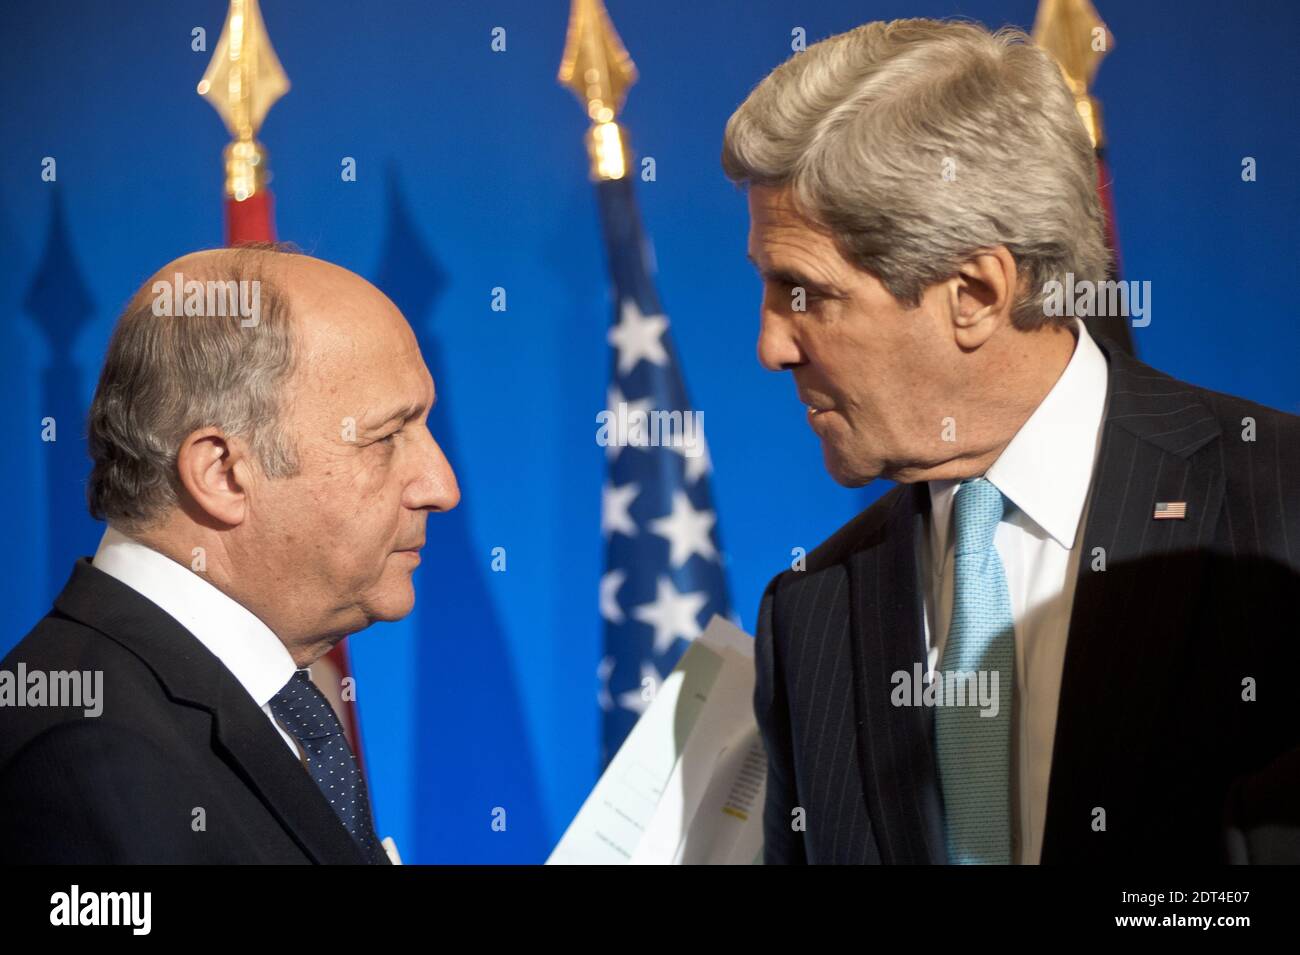 John Kerry and Laurent Fabius pictured during the press conference in Paris. The eleven countries of the Group of Friends of Syria met in Paris to convince the opposition to participate in Geneva-2. Laurent Fabius chaired the ministerial meeting, attended by the President of the Syrian Coalition, Ahmed Al-Jarba. Ministry of Foreign Affairs, in Paris, France, on January 12, 2014. Photo by Nicolas Messyasz/ABACAPRESS.COM Stock Photo